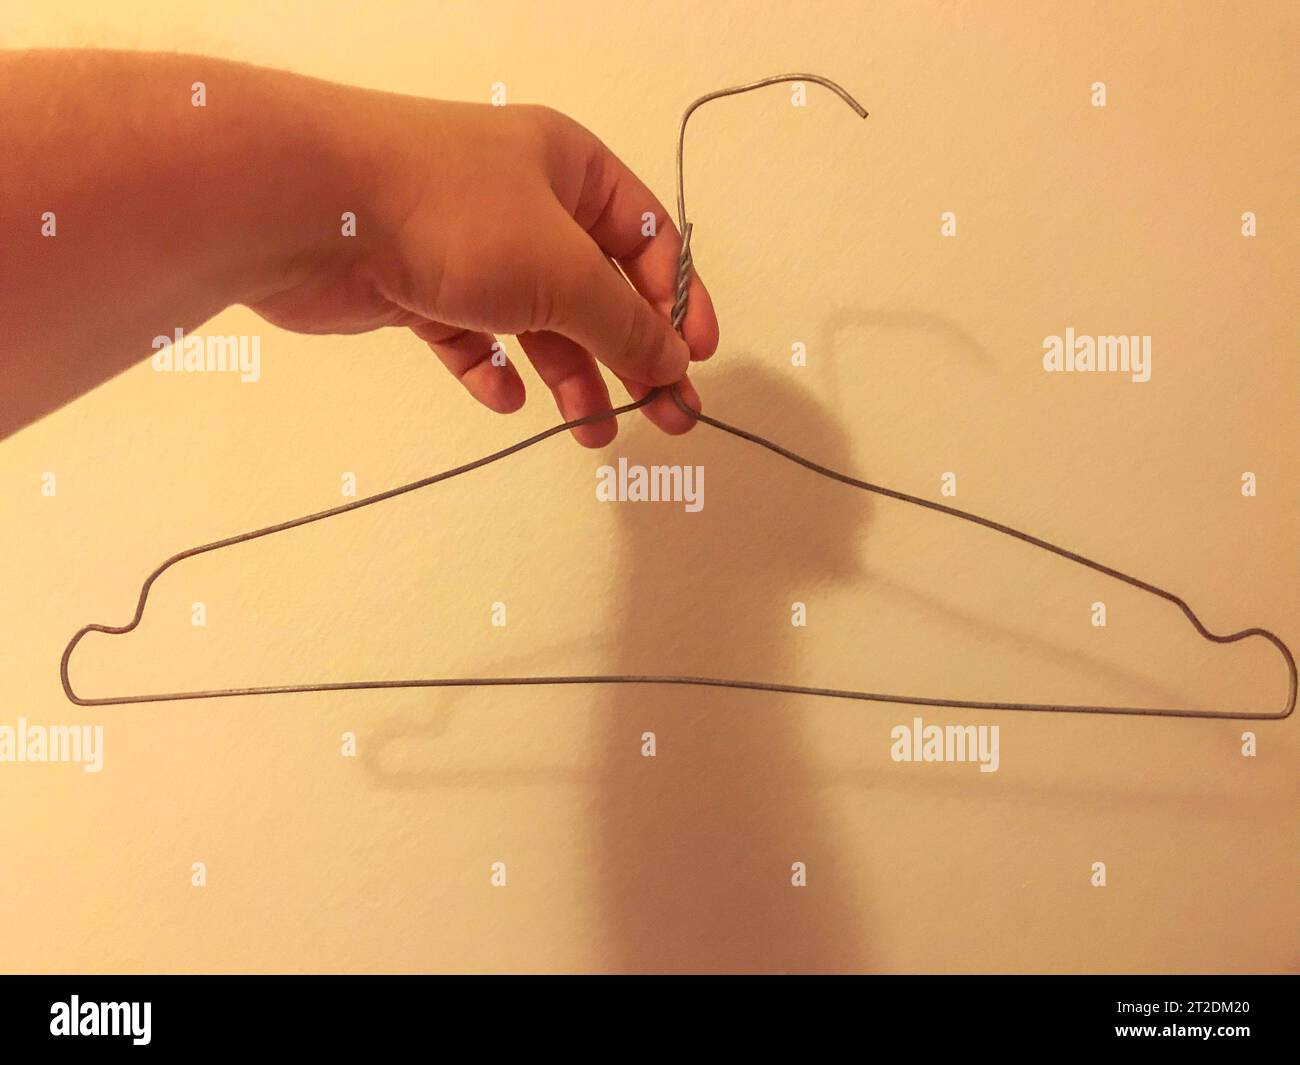 homemade wire hanger for clothes. clumsy, uneven hanger with your own hands. storing clothes in a poor man's wardrobe. Stock Photo